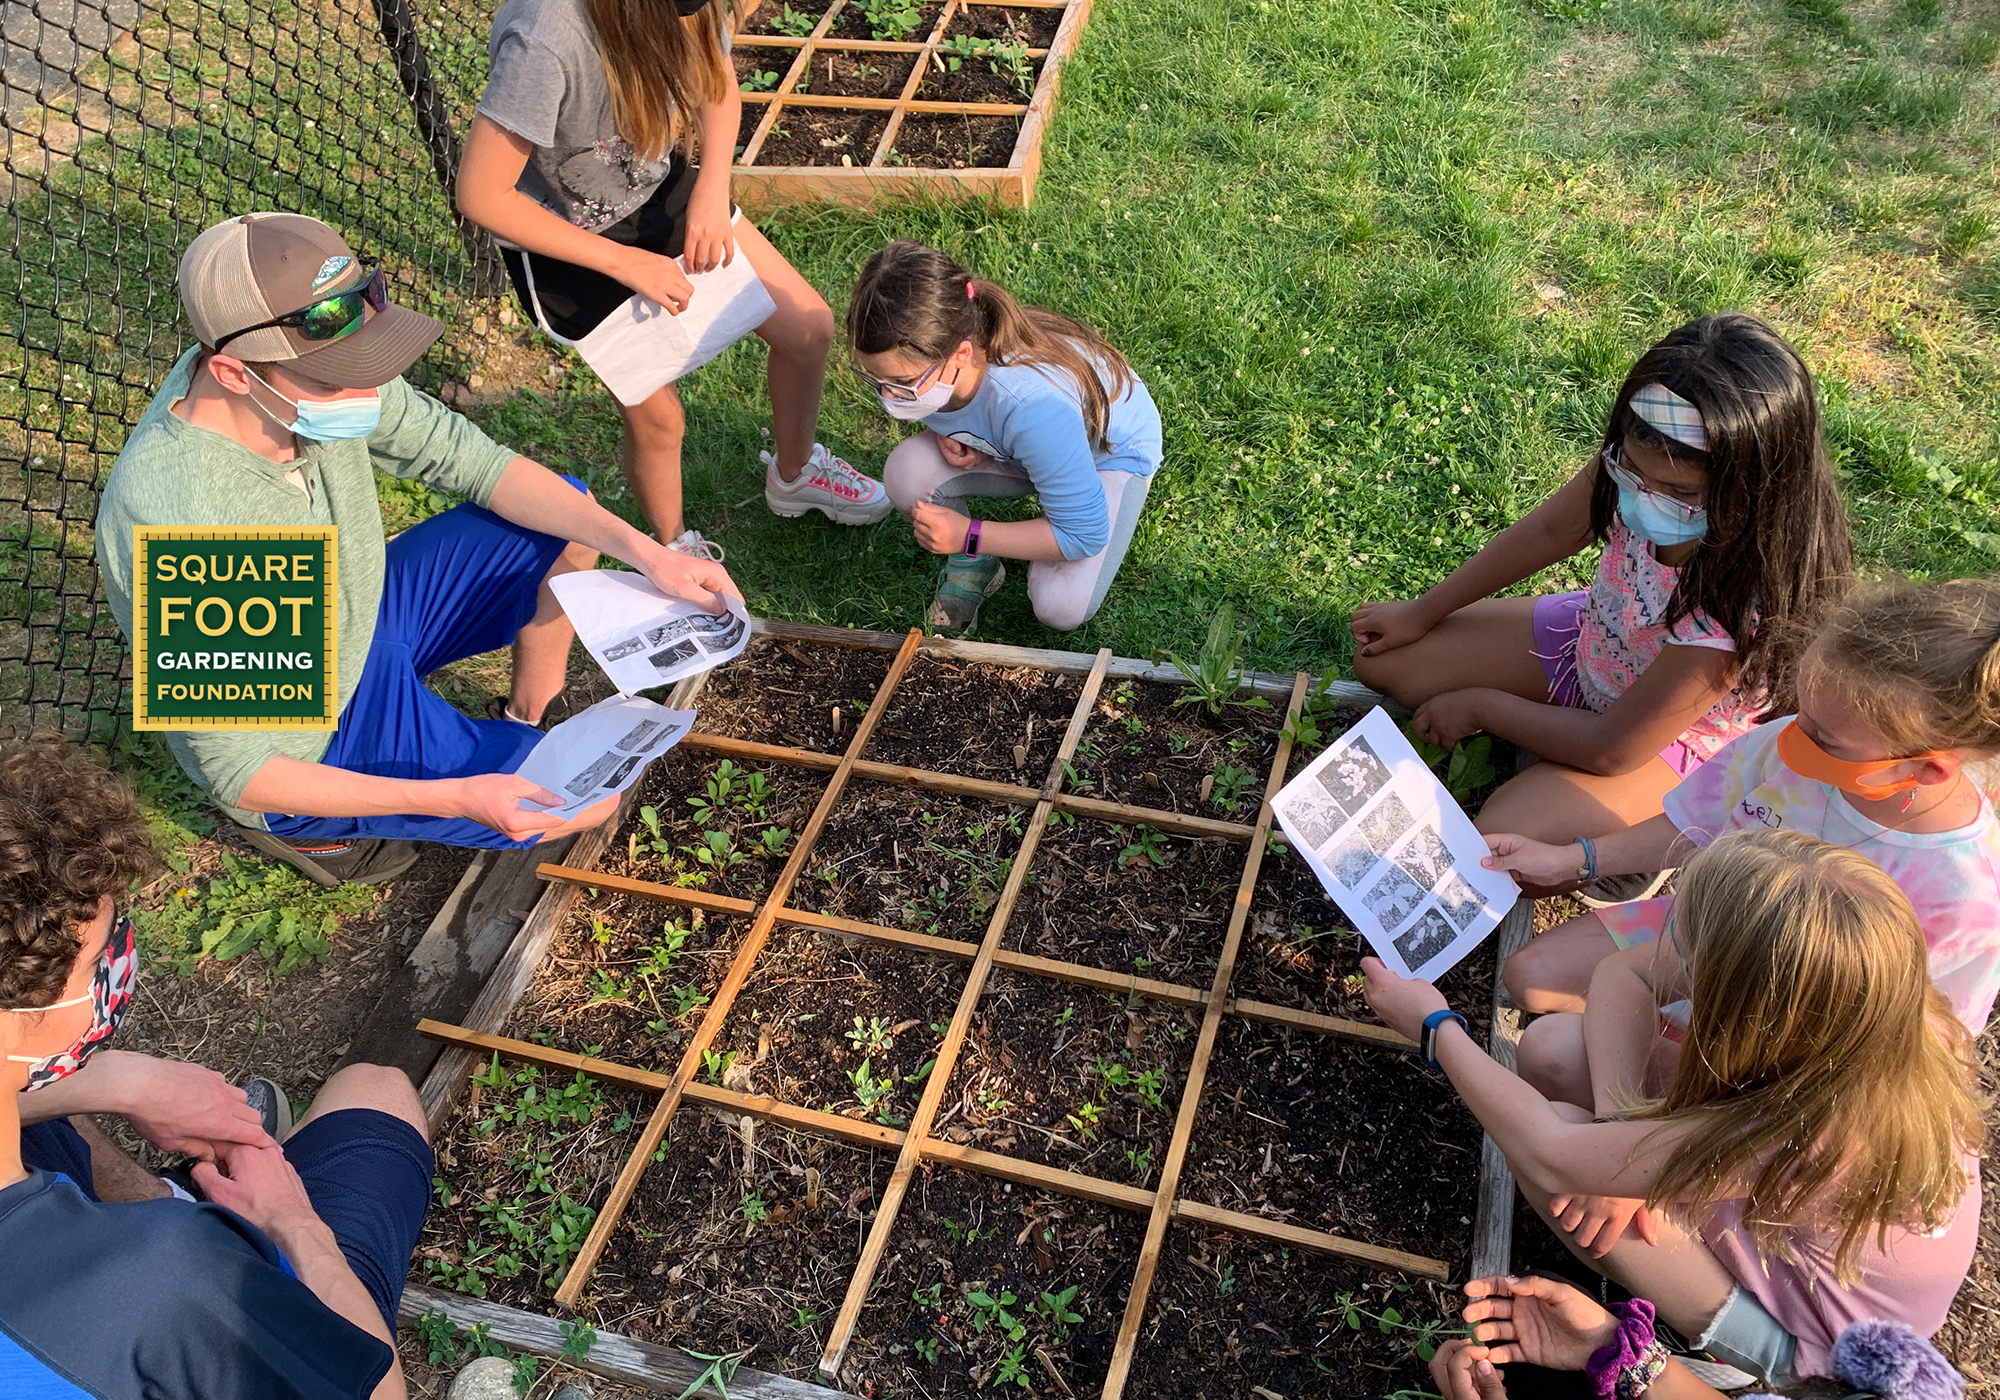 kids are square foot gardening